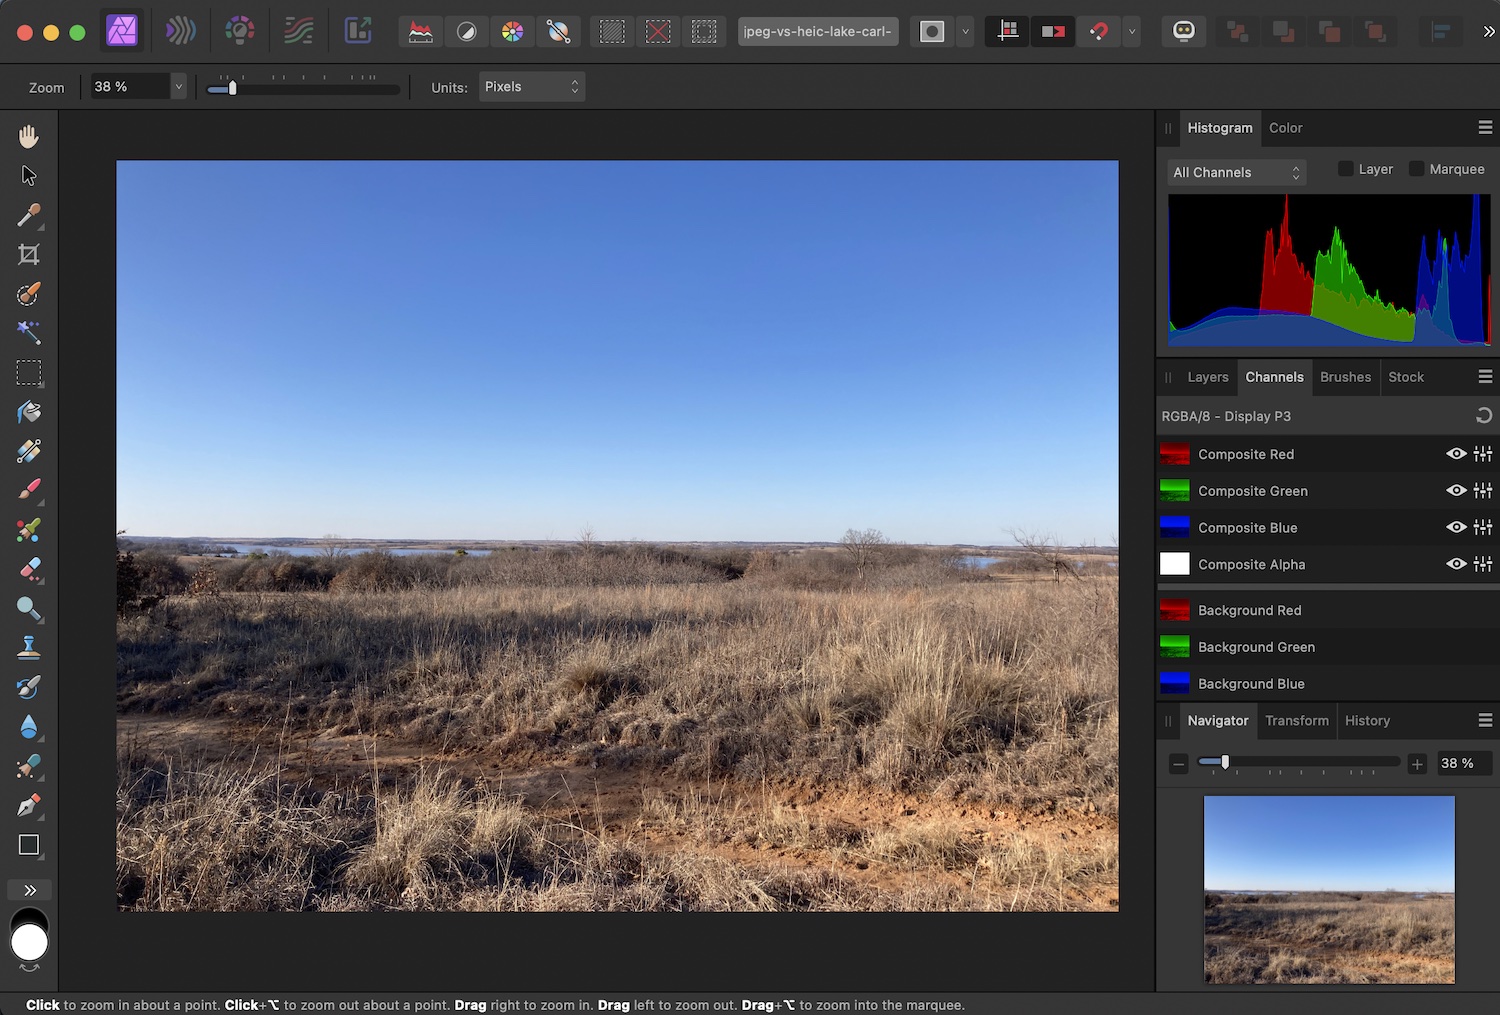 JPEG vs HEIC: Affinity Photo's editing interface showing an HEIC image of a field and a sky.